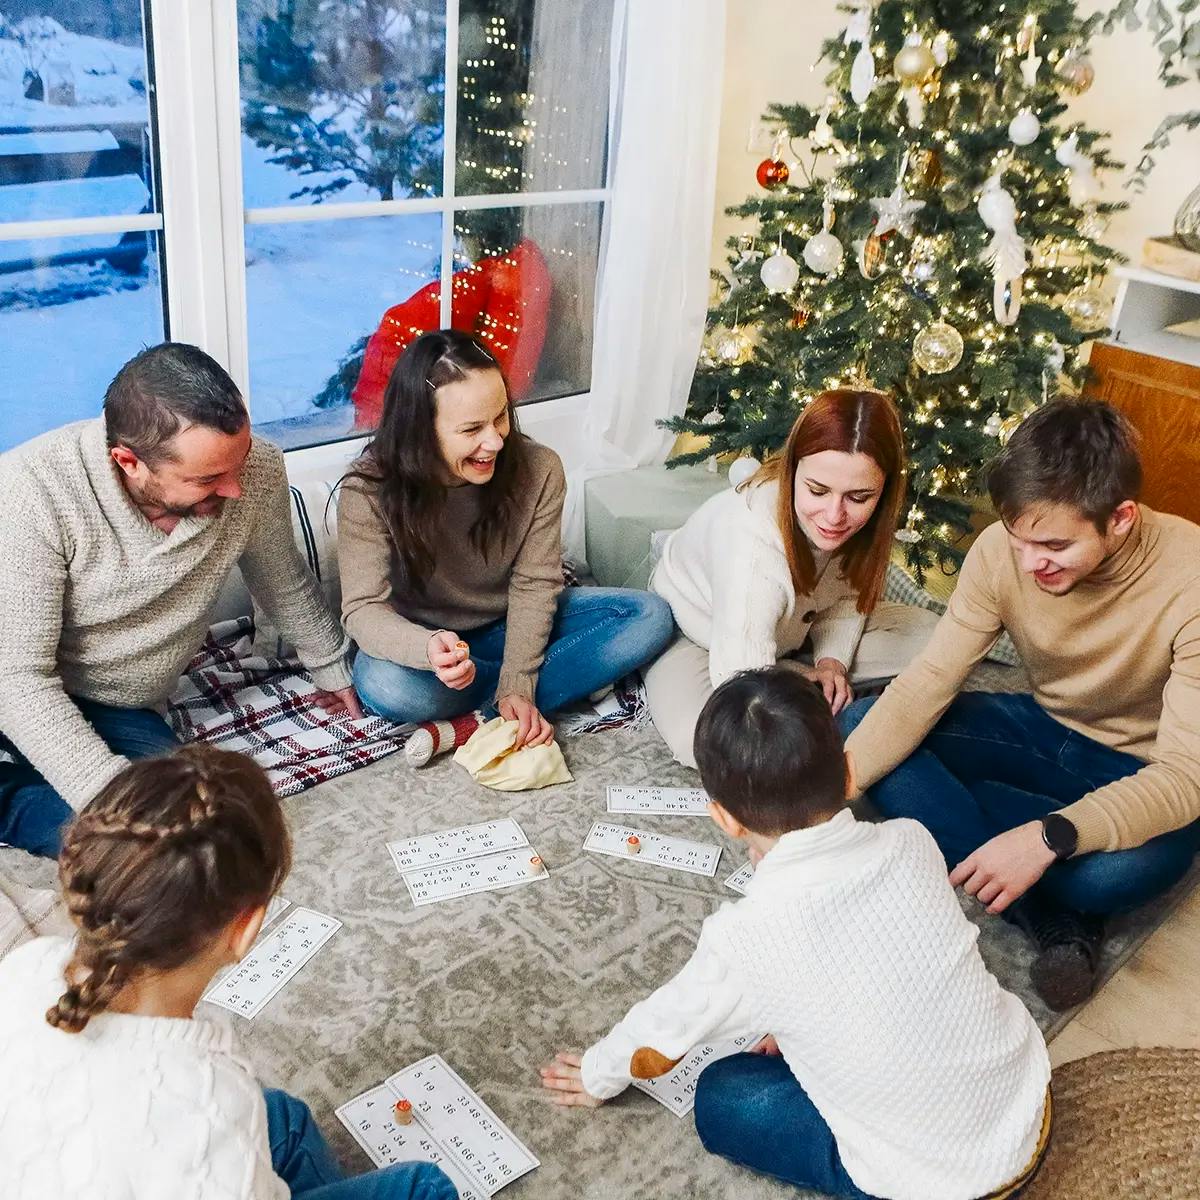 Adults and children sitting on the floor playing a bingo-like Christmas game, with snow outside the window and a Christmas tree in the background.